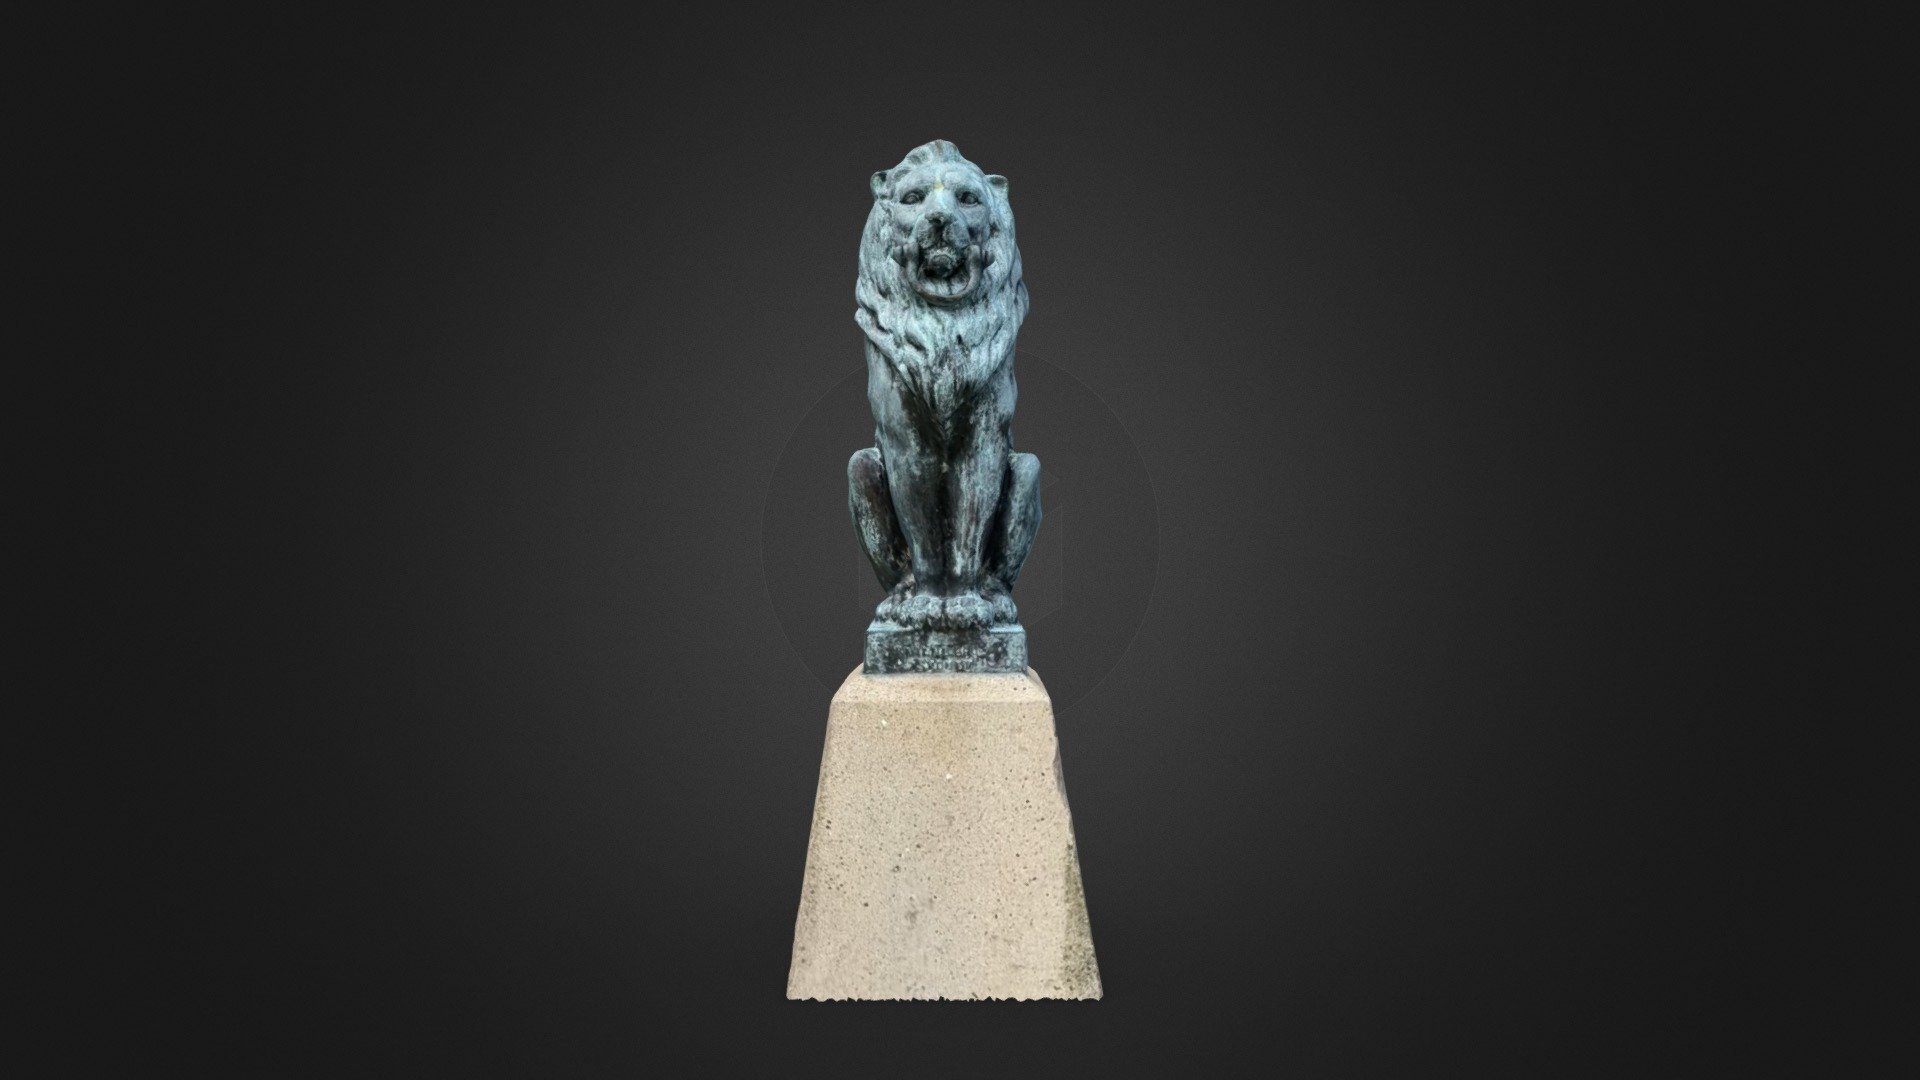 This is a photoscanned statue of lion sitting on a stone plinth 3d model